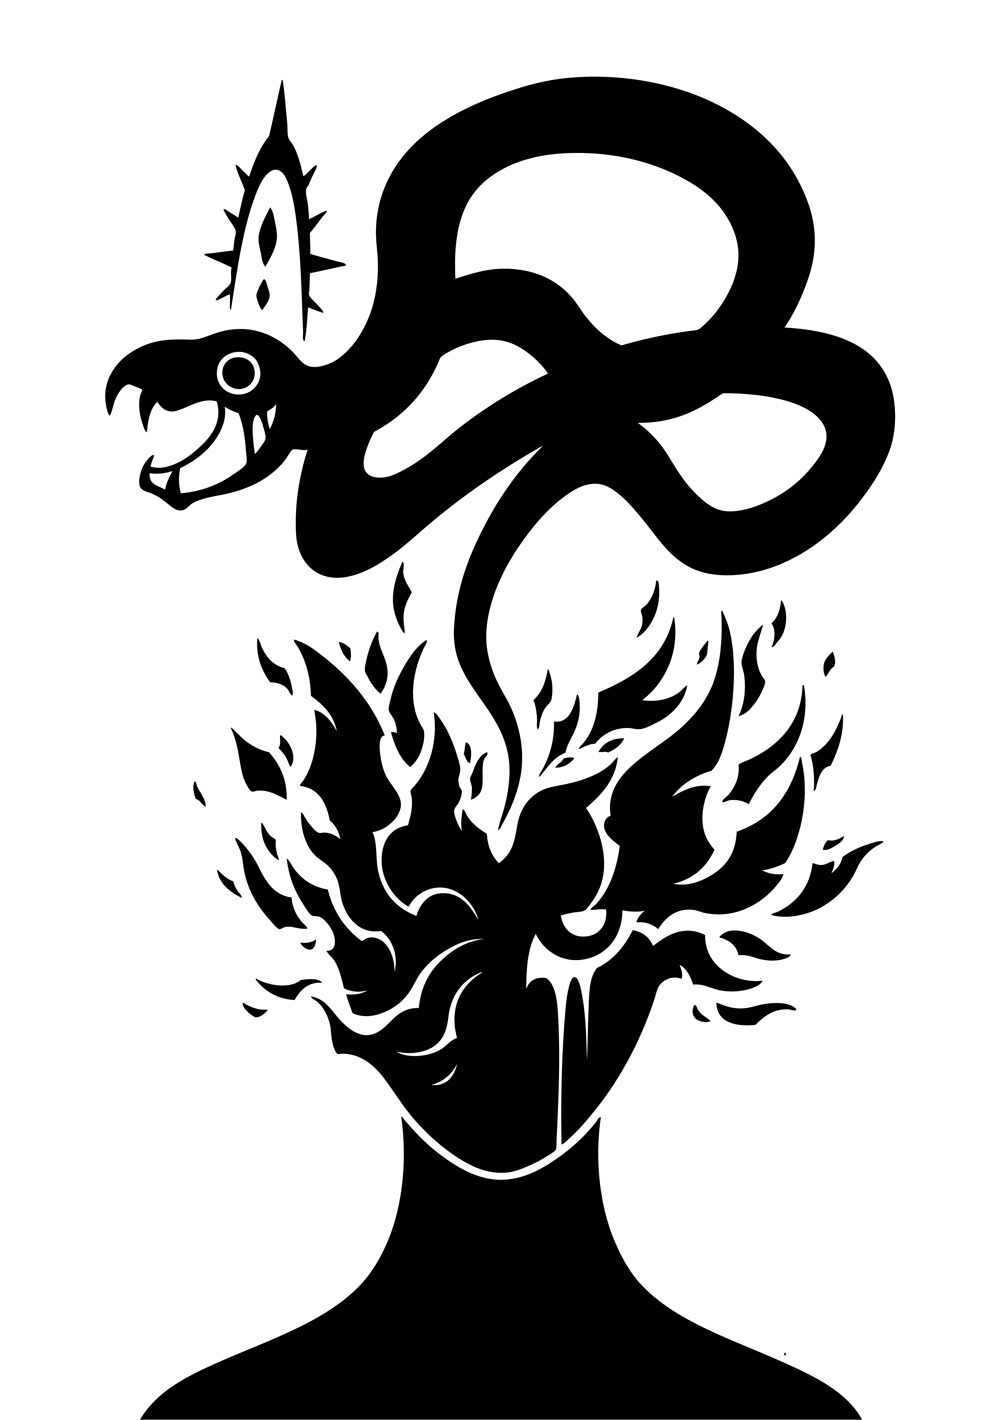 SunnyClockwork on X: SCP Foundation art, SCP-4352 - Storytime. SCP-4352 -  Storytime by Tanhony and Henzoid:    / X